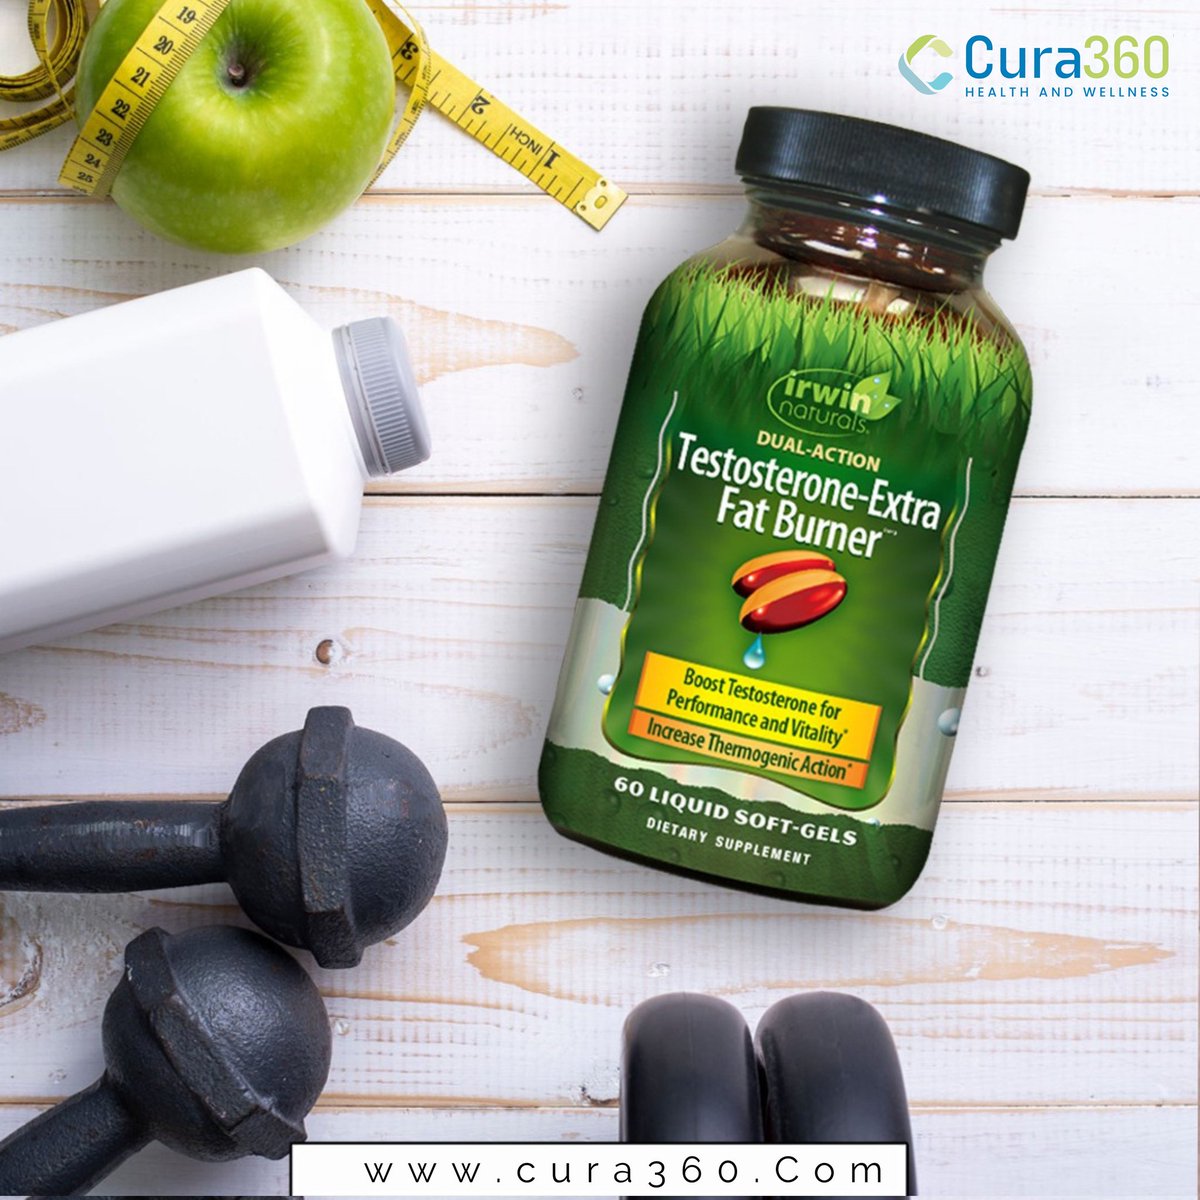 Testosterone Support + Fat Burning
abilities?

This dual-action formula has it all

 The search is over-you've found your new secret weapon

#testosterone #fatburner #secretweapon #irwinnaturals
#vitamins #minerals #supplements #wellbeing #wellness
#multivitamins #green #men